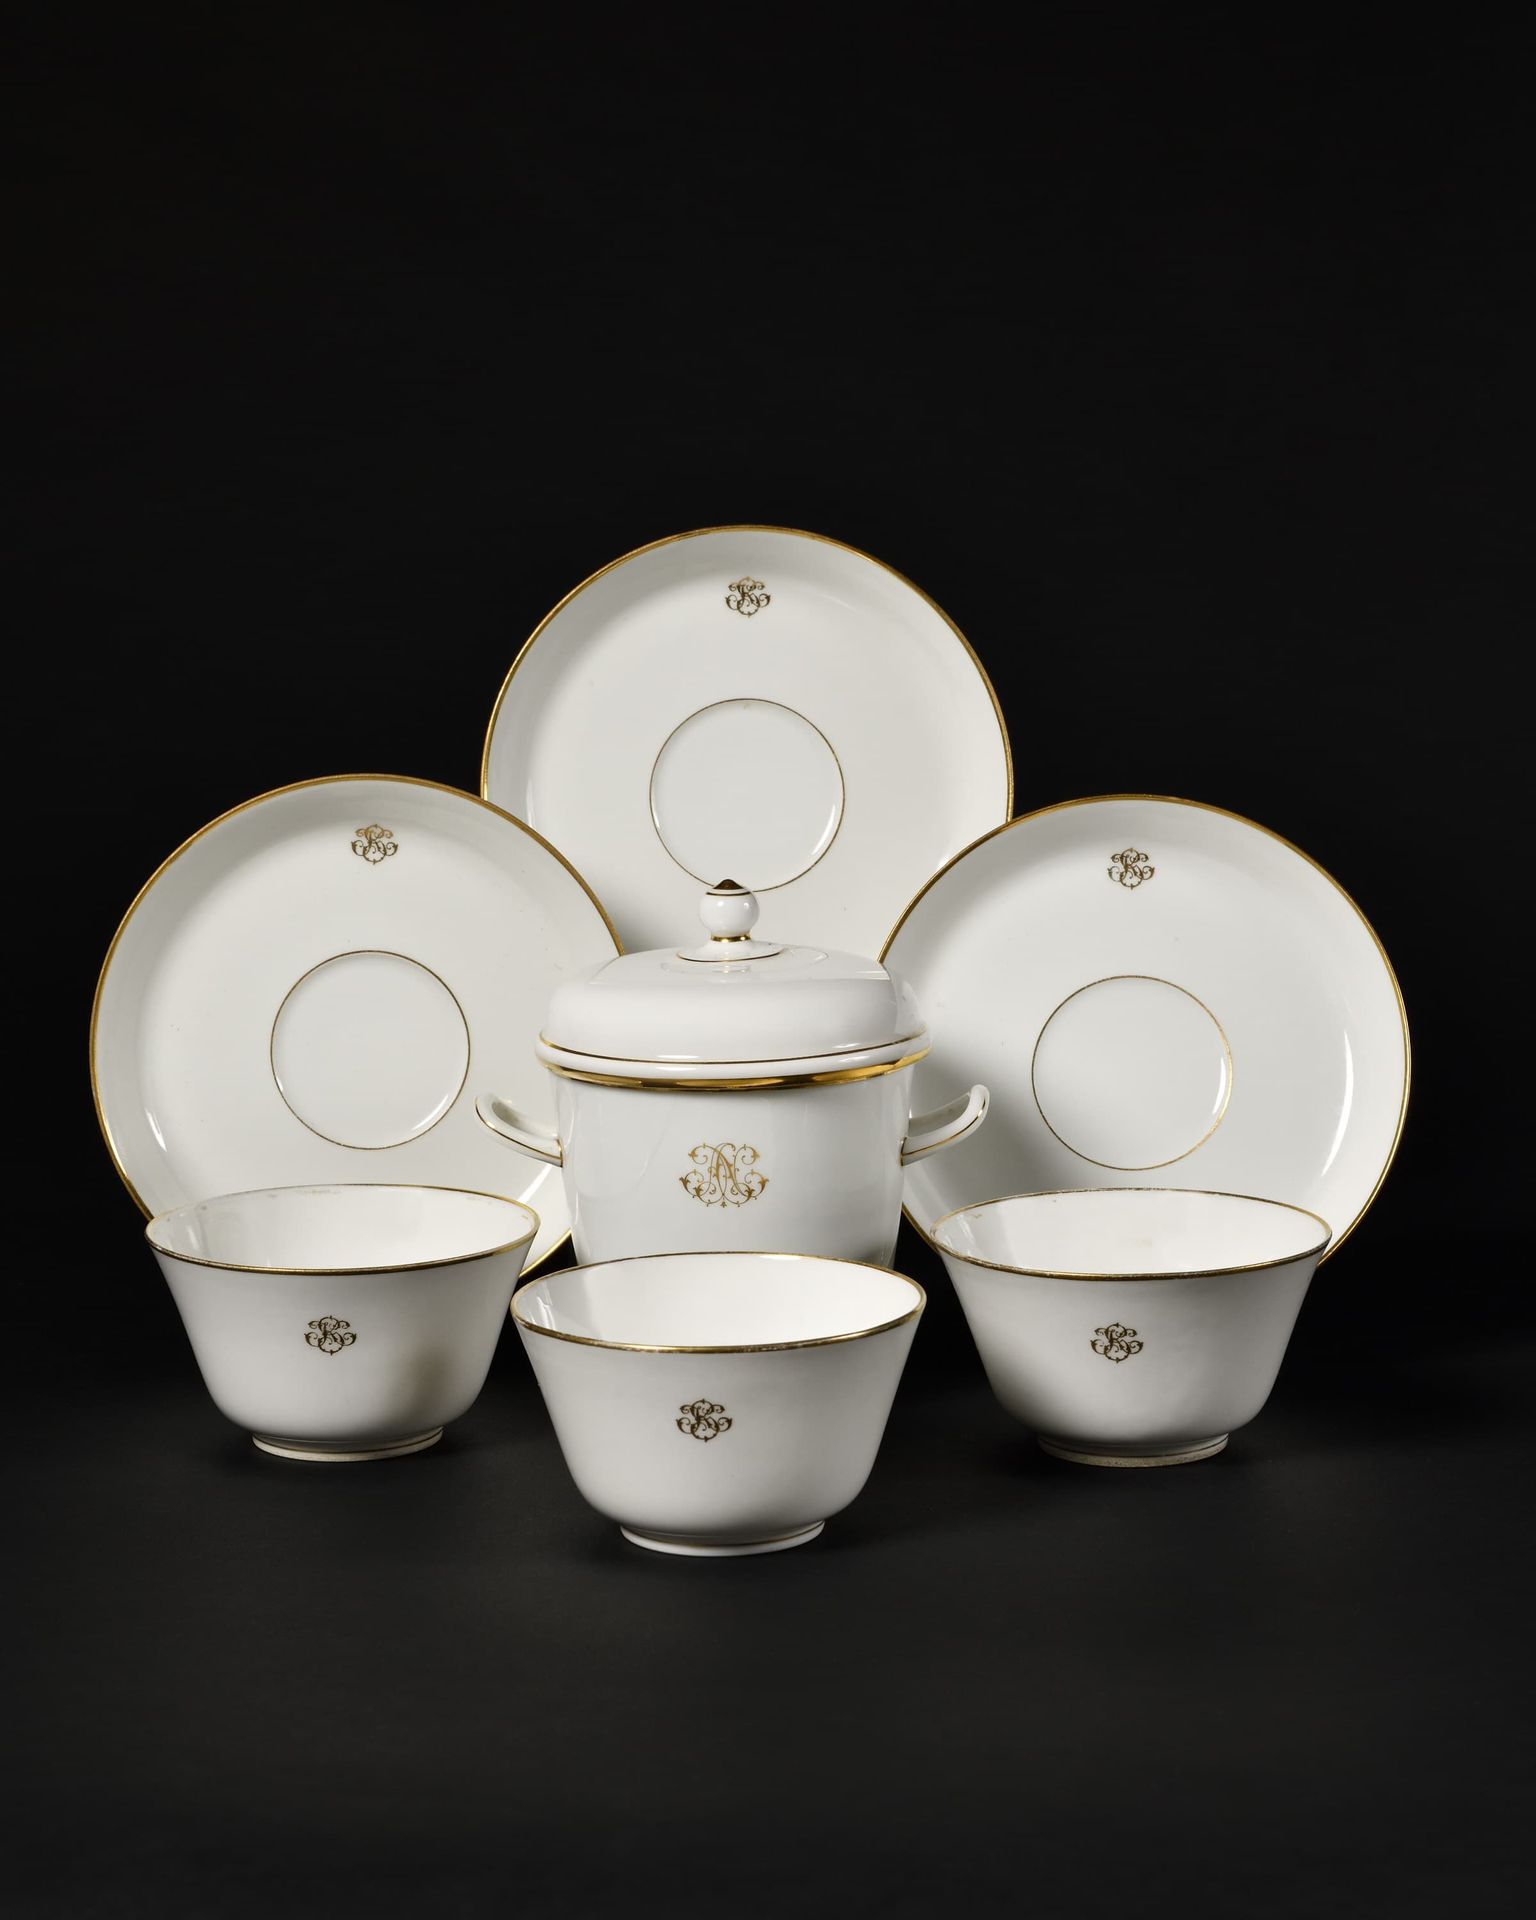 Null SEVRES
Part of porcelain service with gold decoration of a monogram includi&hellip;